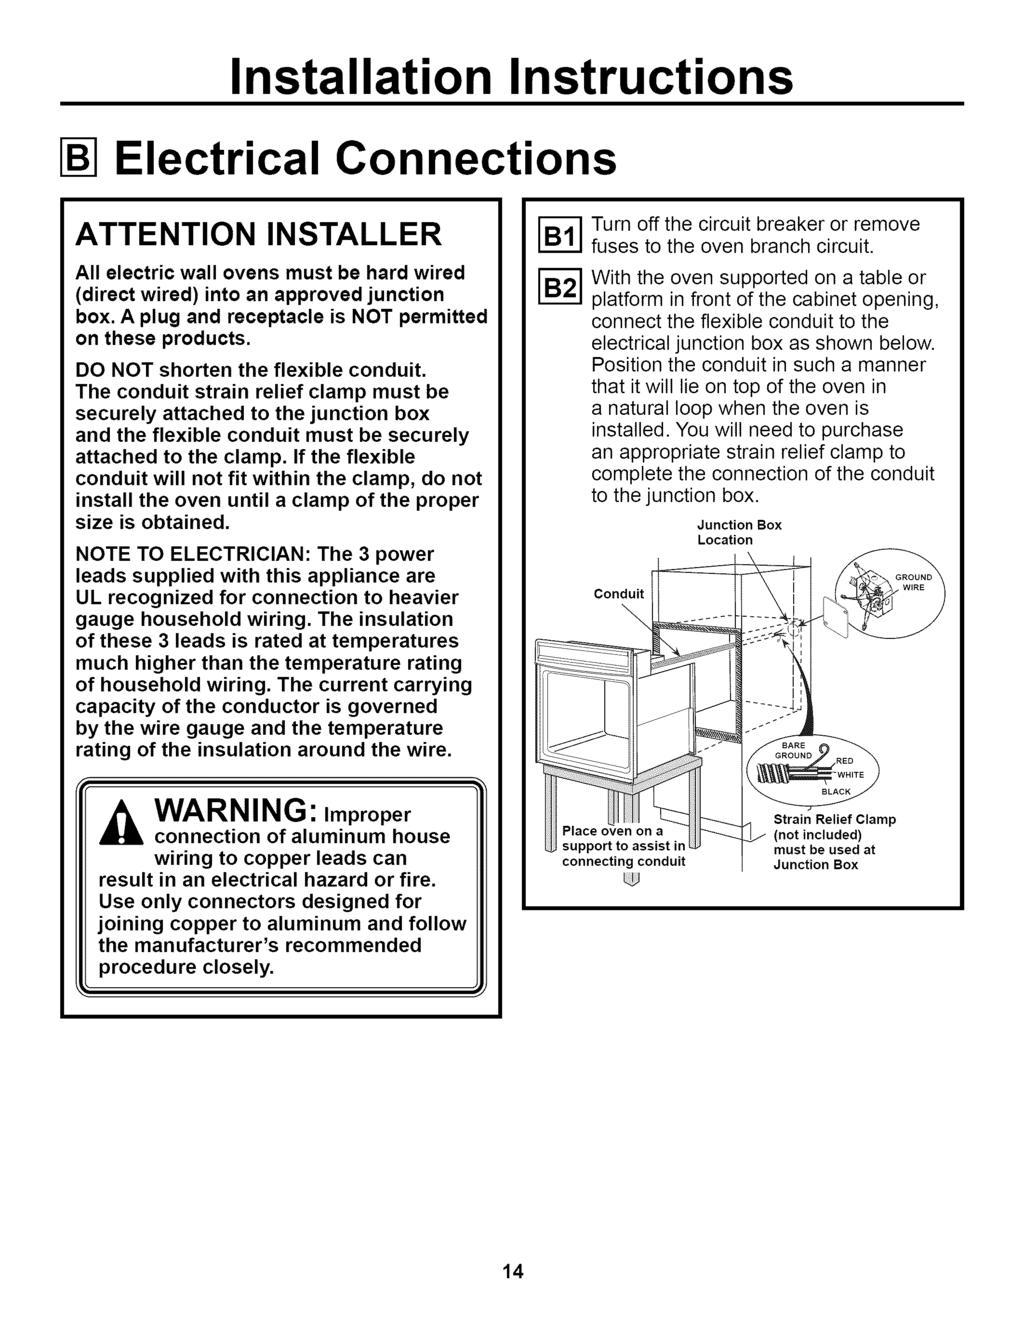 Electrical Connections ATTENTION INSTALLER All electric wall ovens must be hard wired (direct wired) into an approved junction box. A plug and receptacle is NOT permitted on these products.